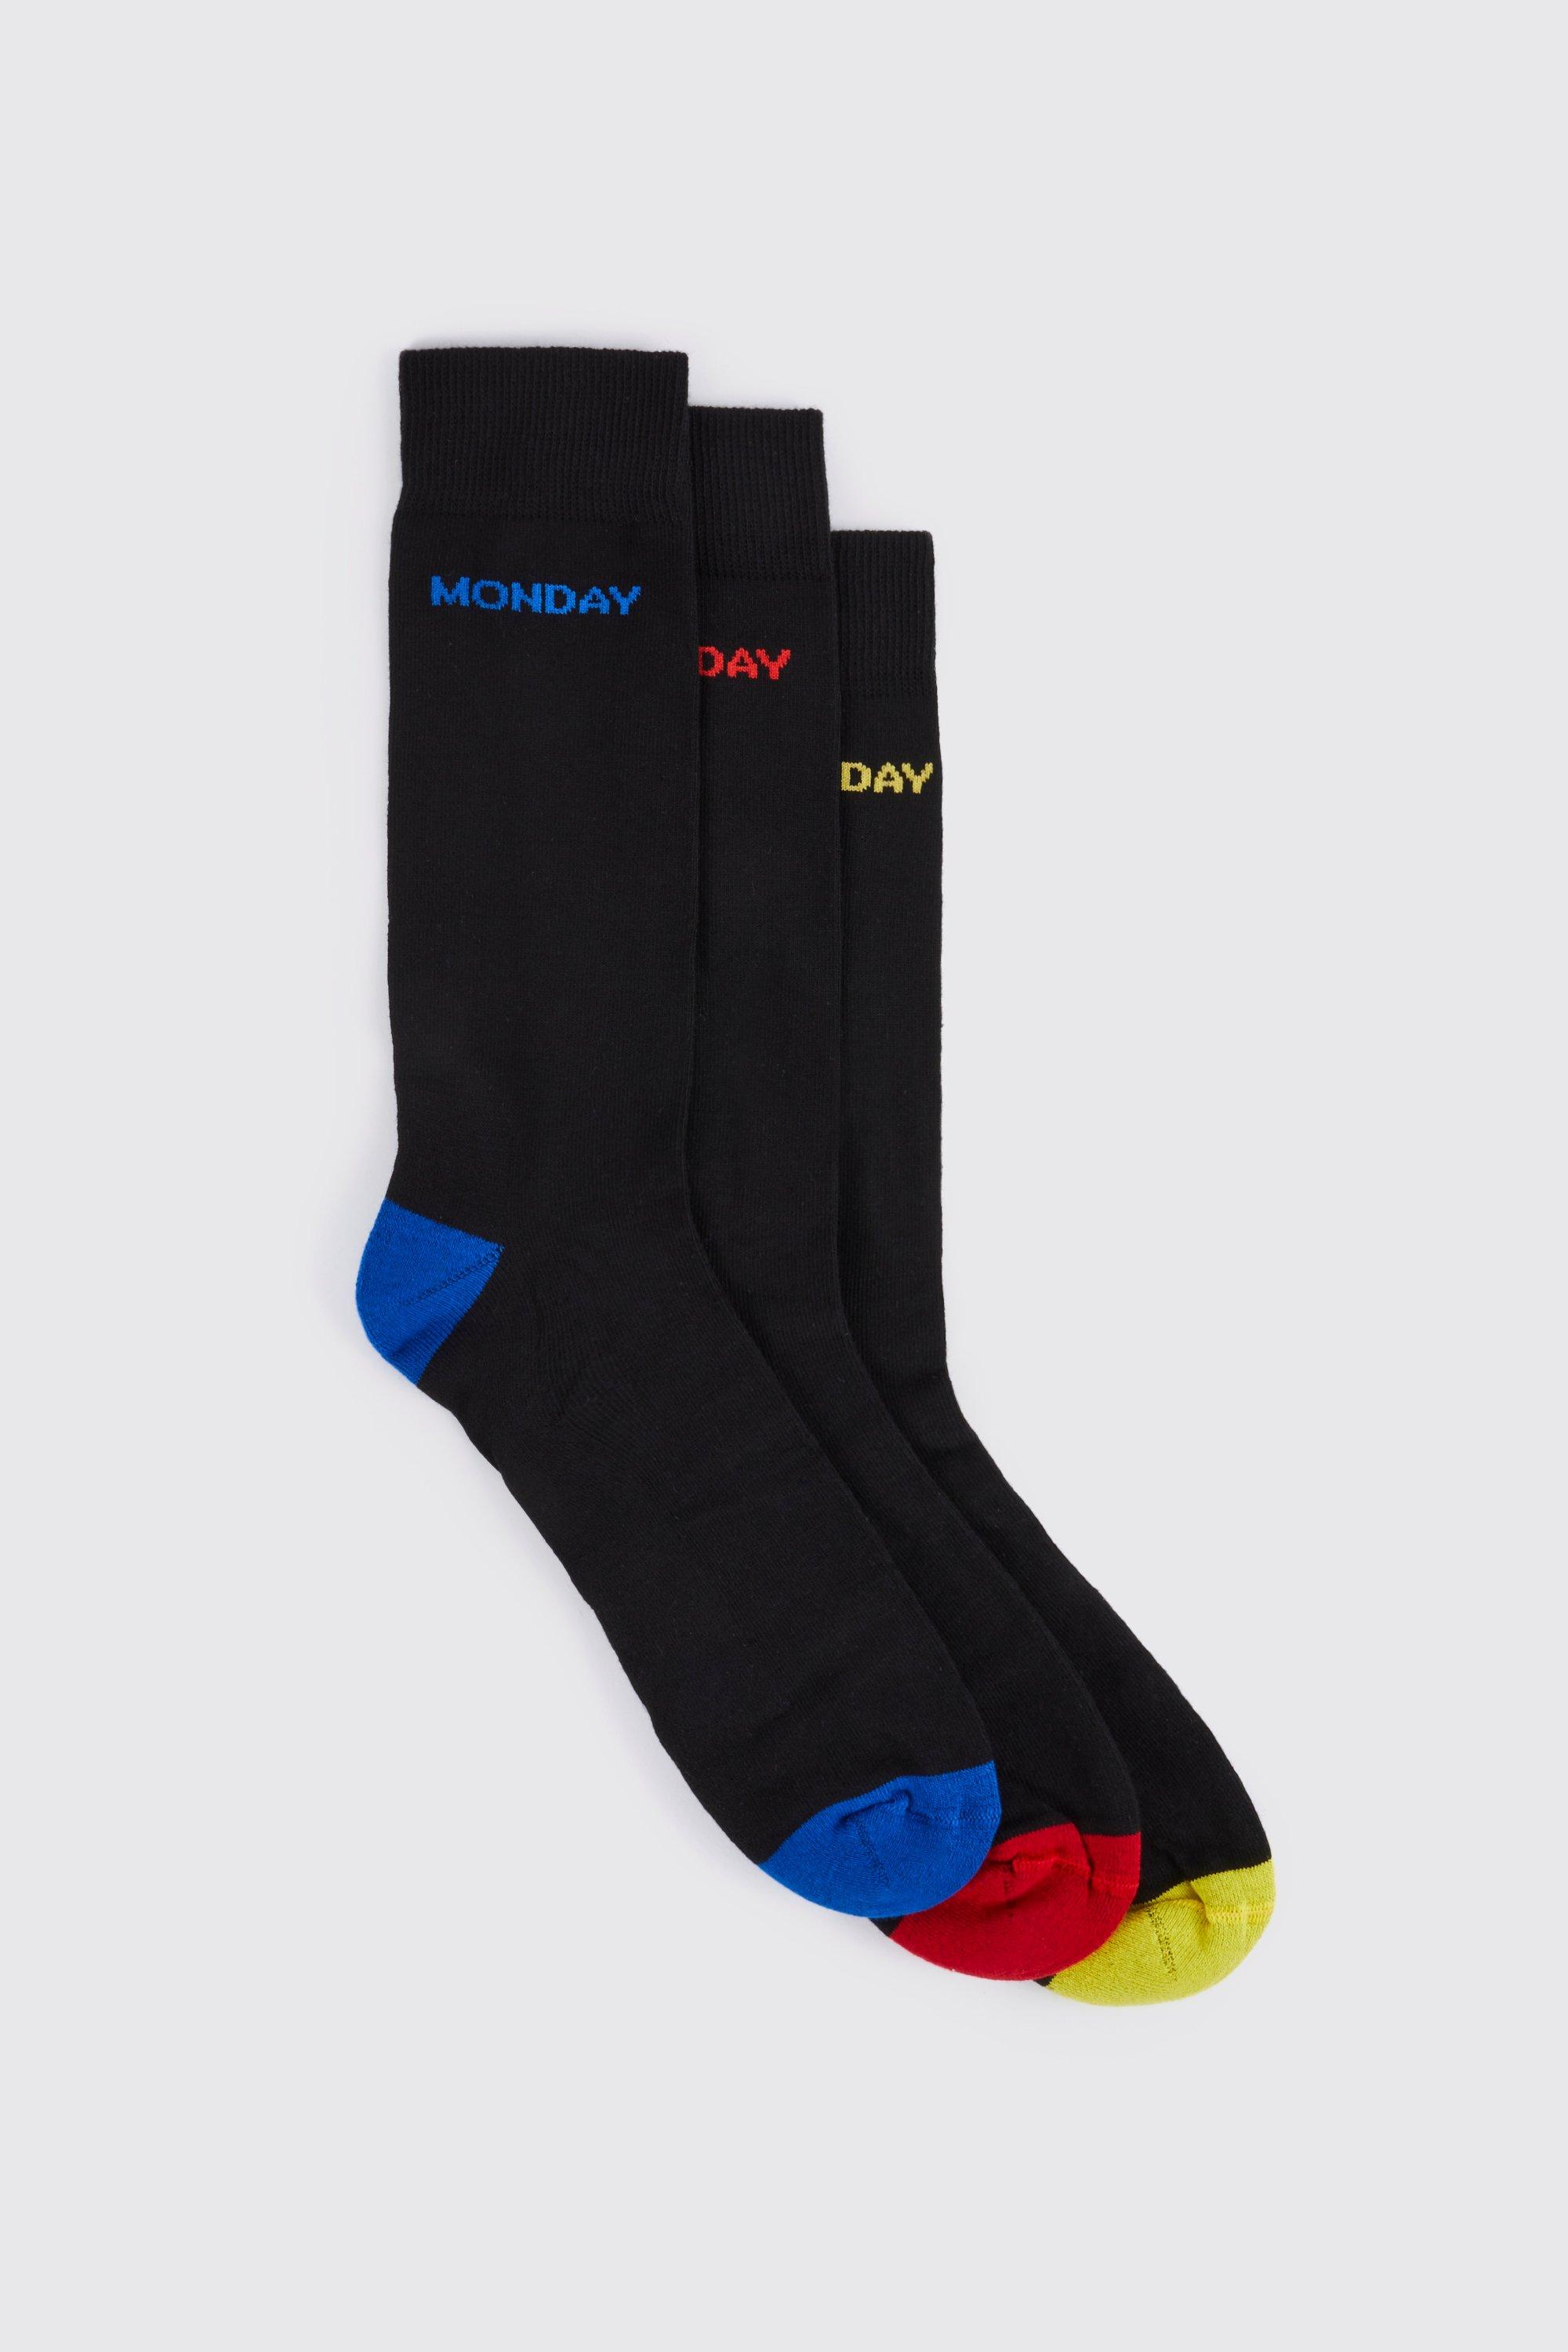 men's 7 pack boxed days of the week socks - multi - one size, multi